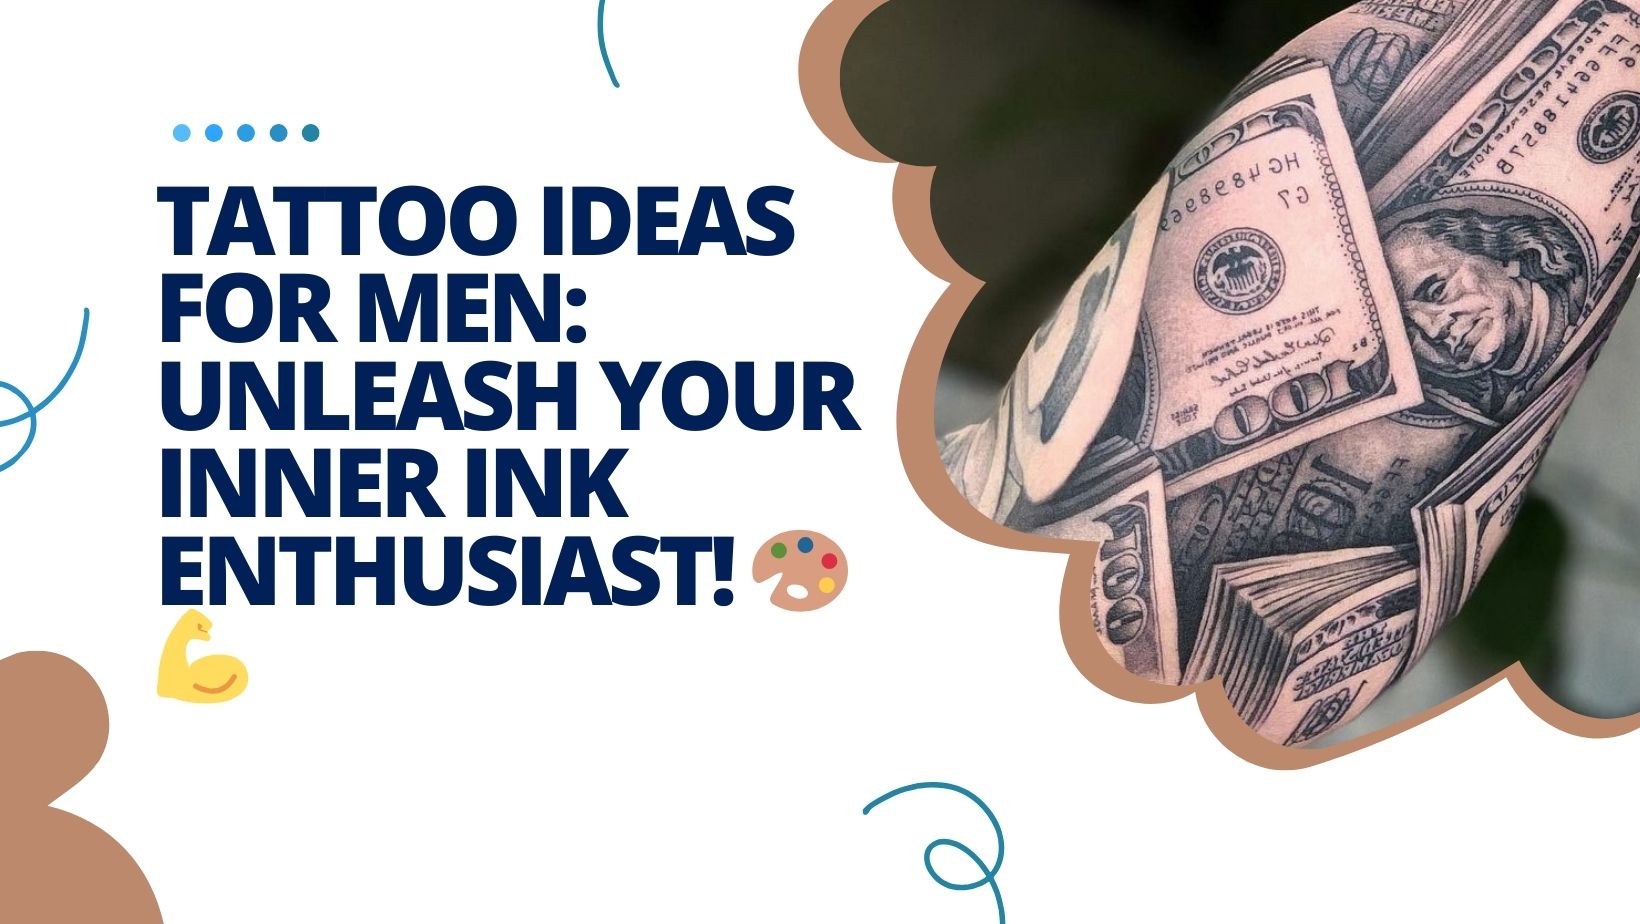 Tattoo Ideas for Men: Unleash Your Inner Ink Enthusiast! 🎨💪